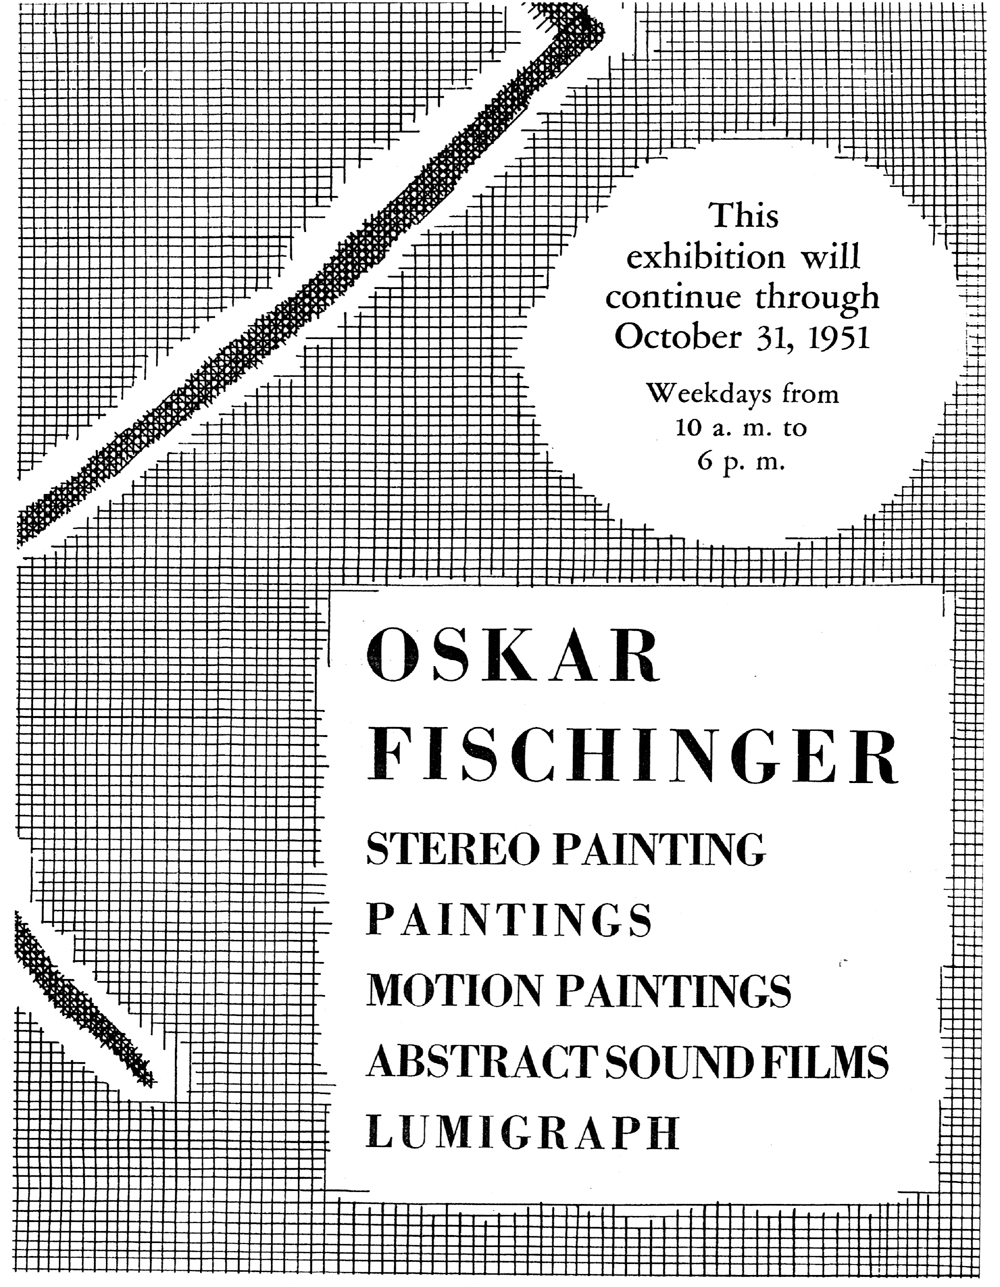 Detail from poster for 1951 Fischinger exhibition at Frank Perls Gallery, Beverly Hills, CA, courtesy CVM